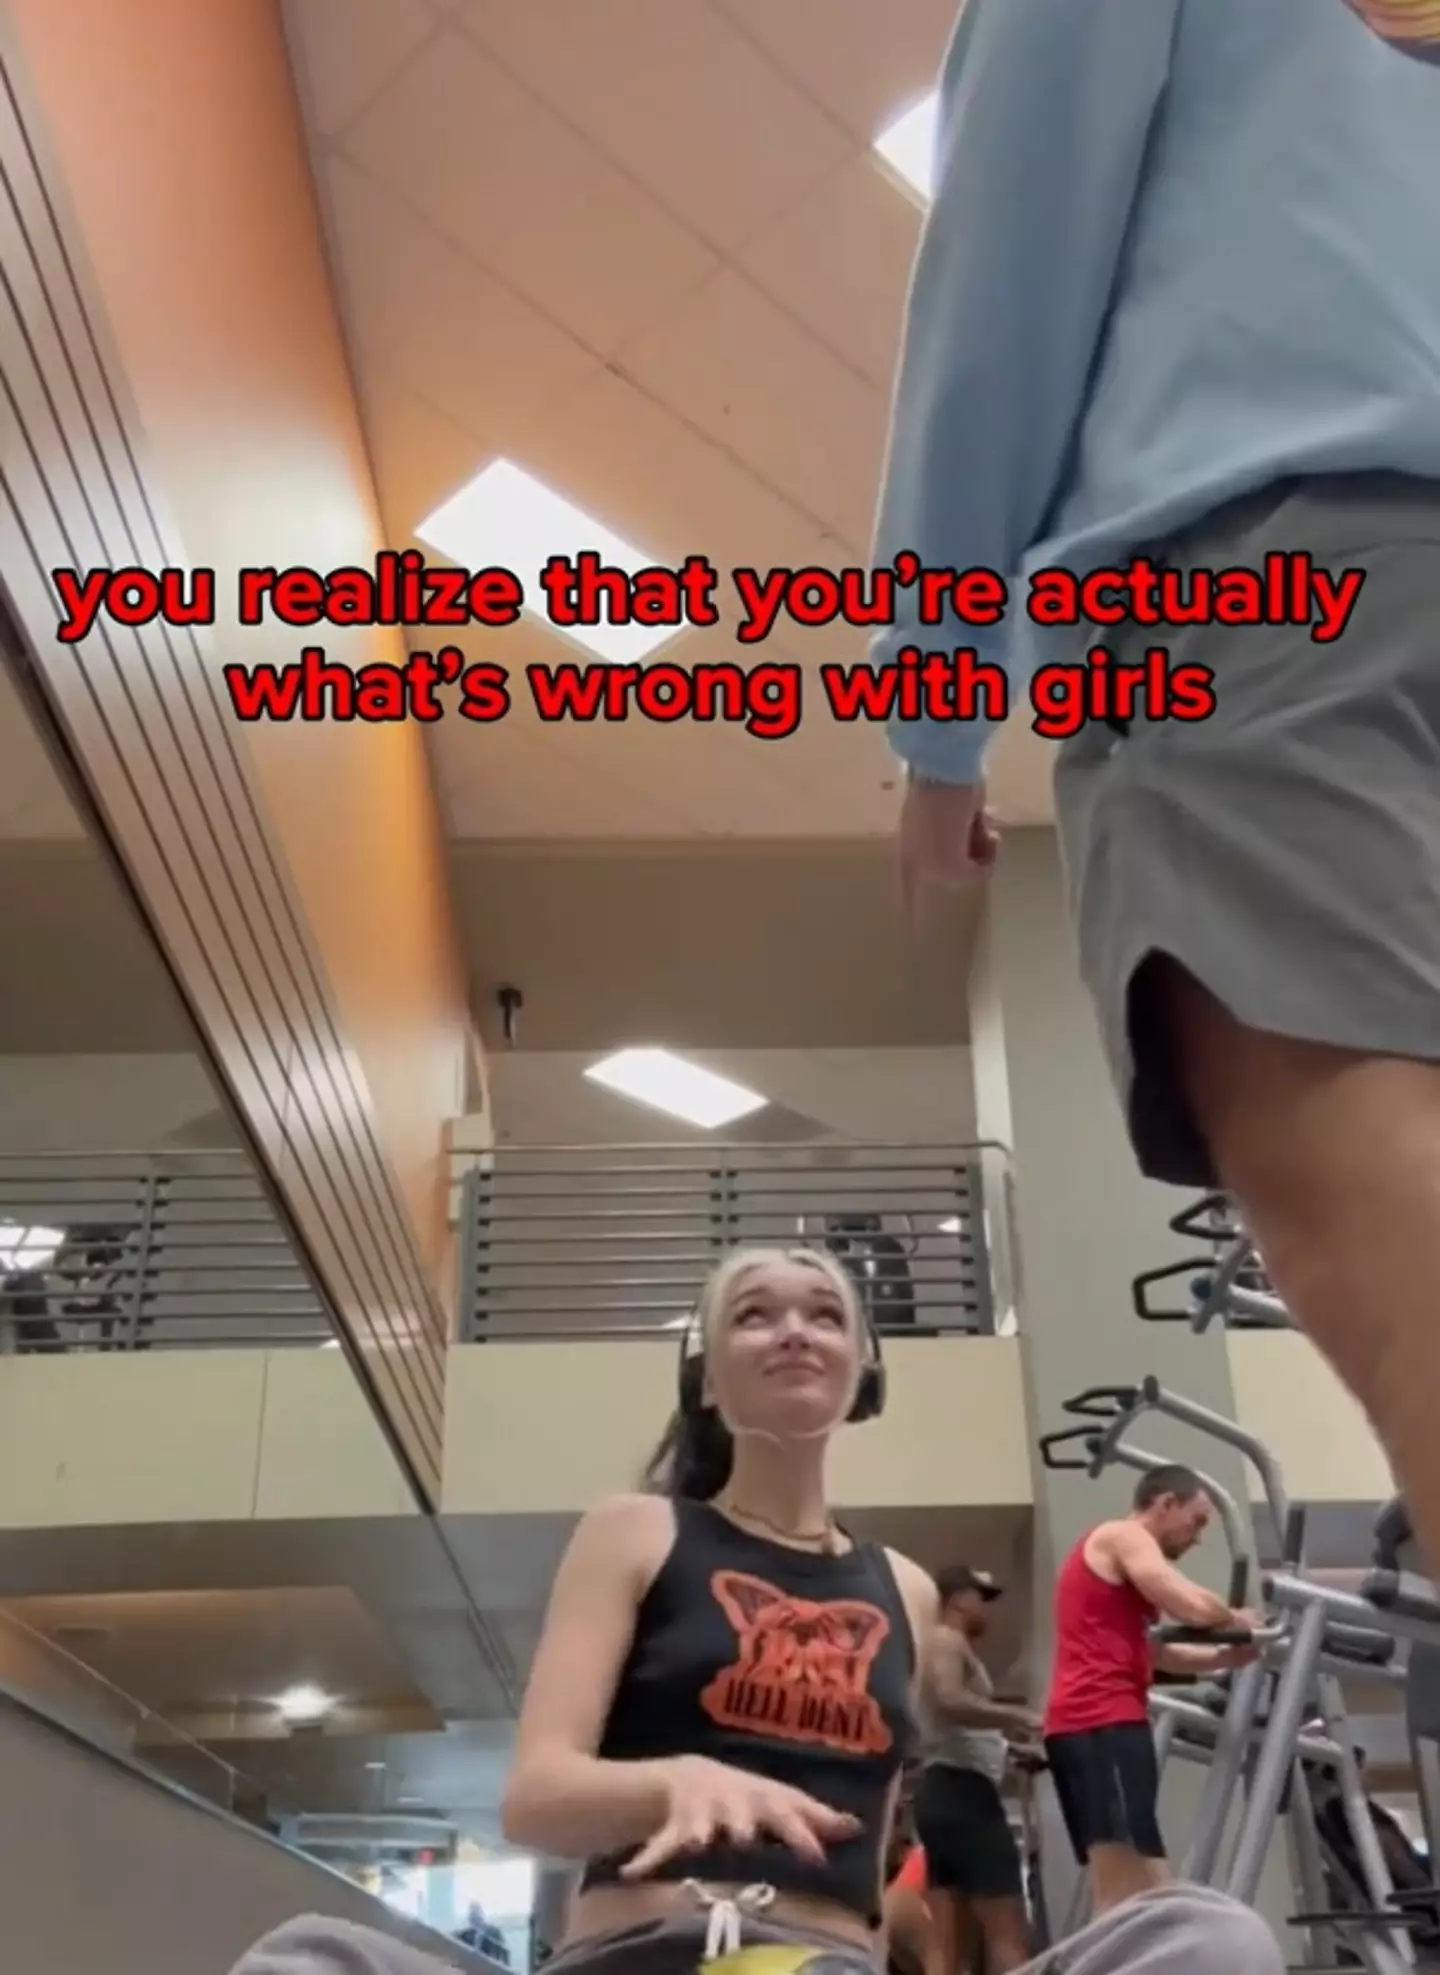 I'm a gym girl - working out is fun until you realize you've had